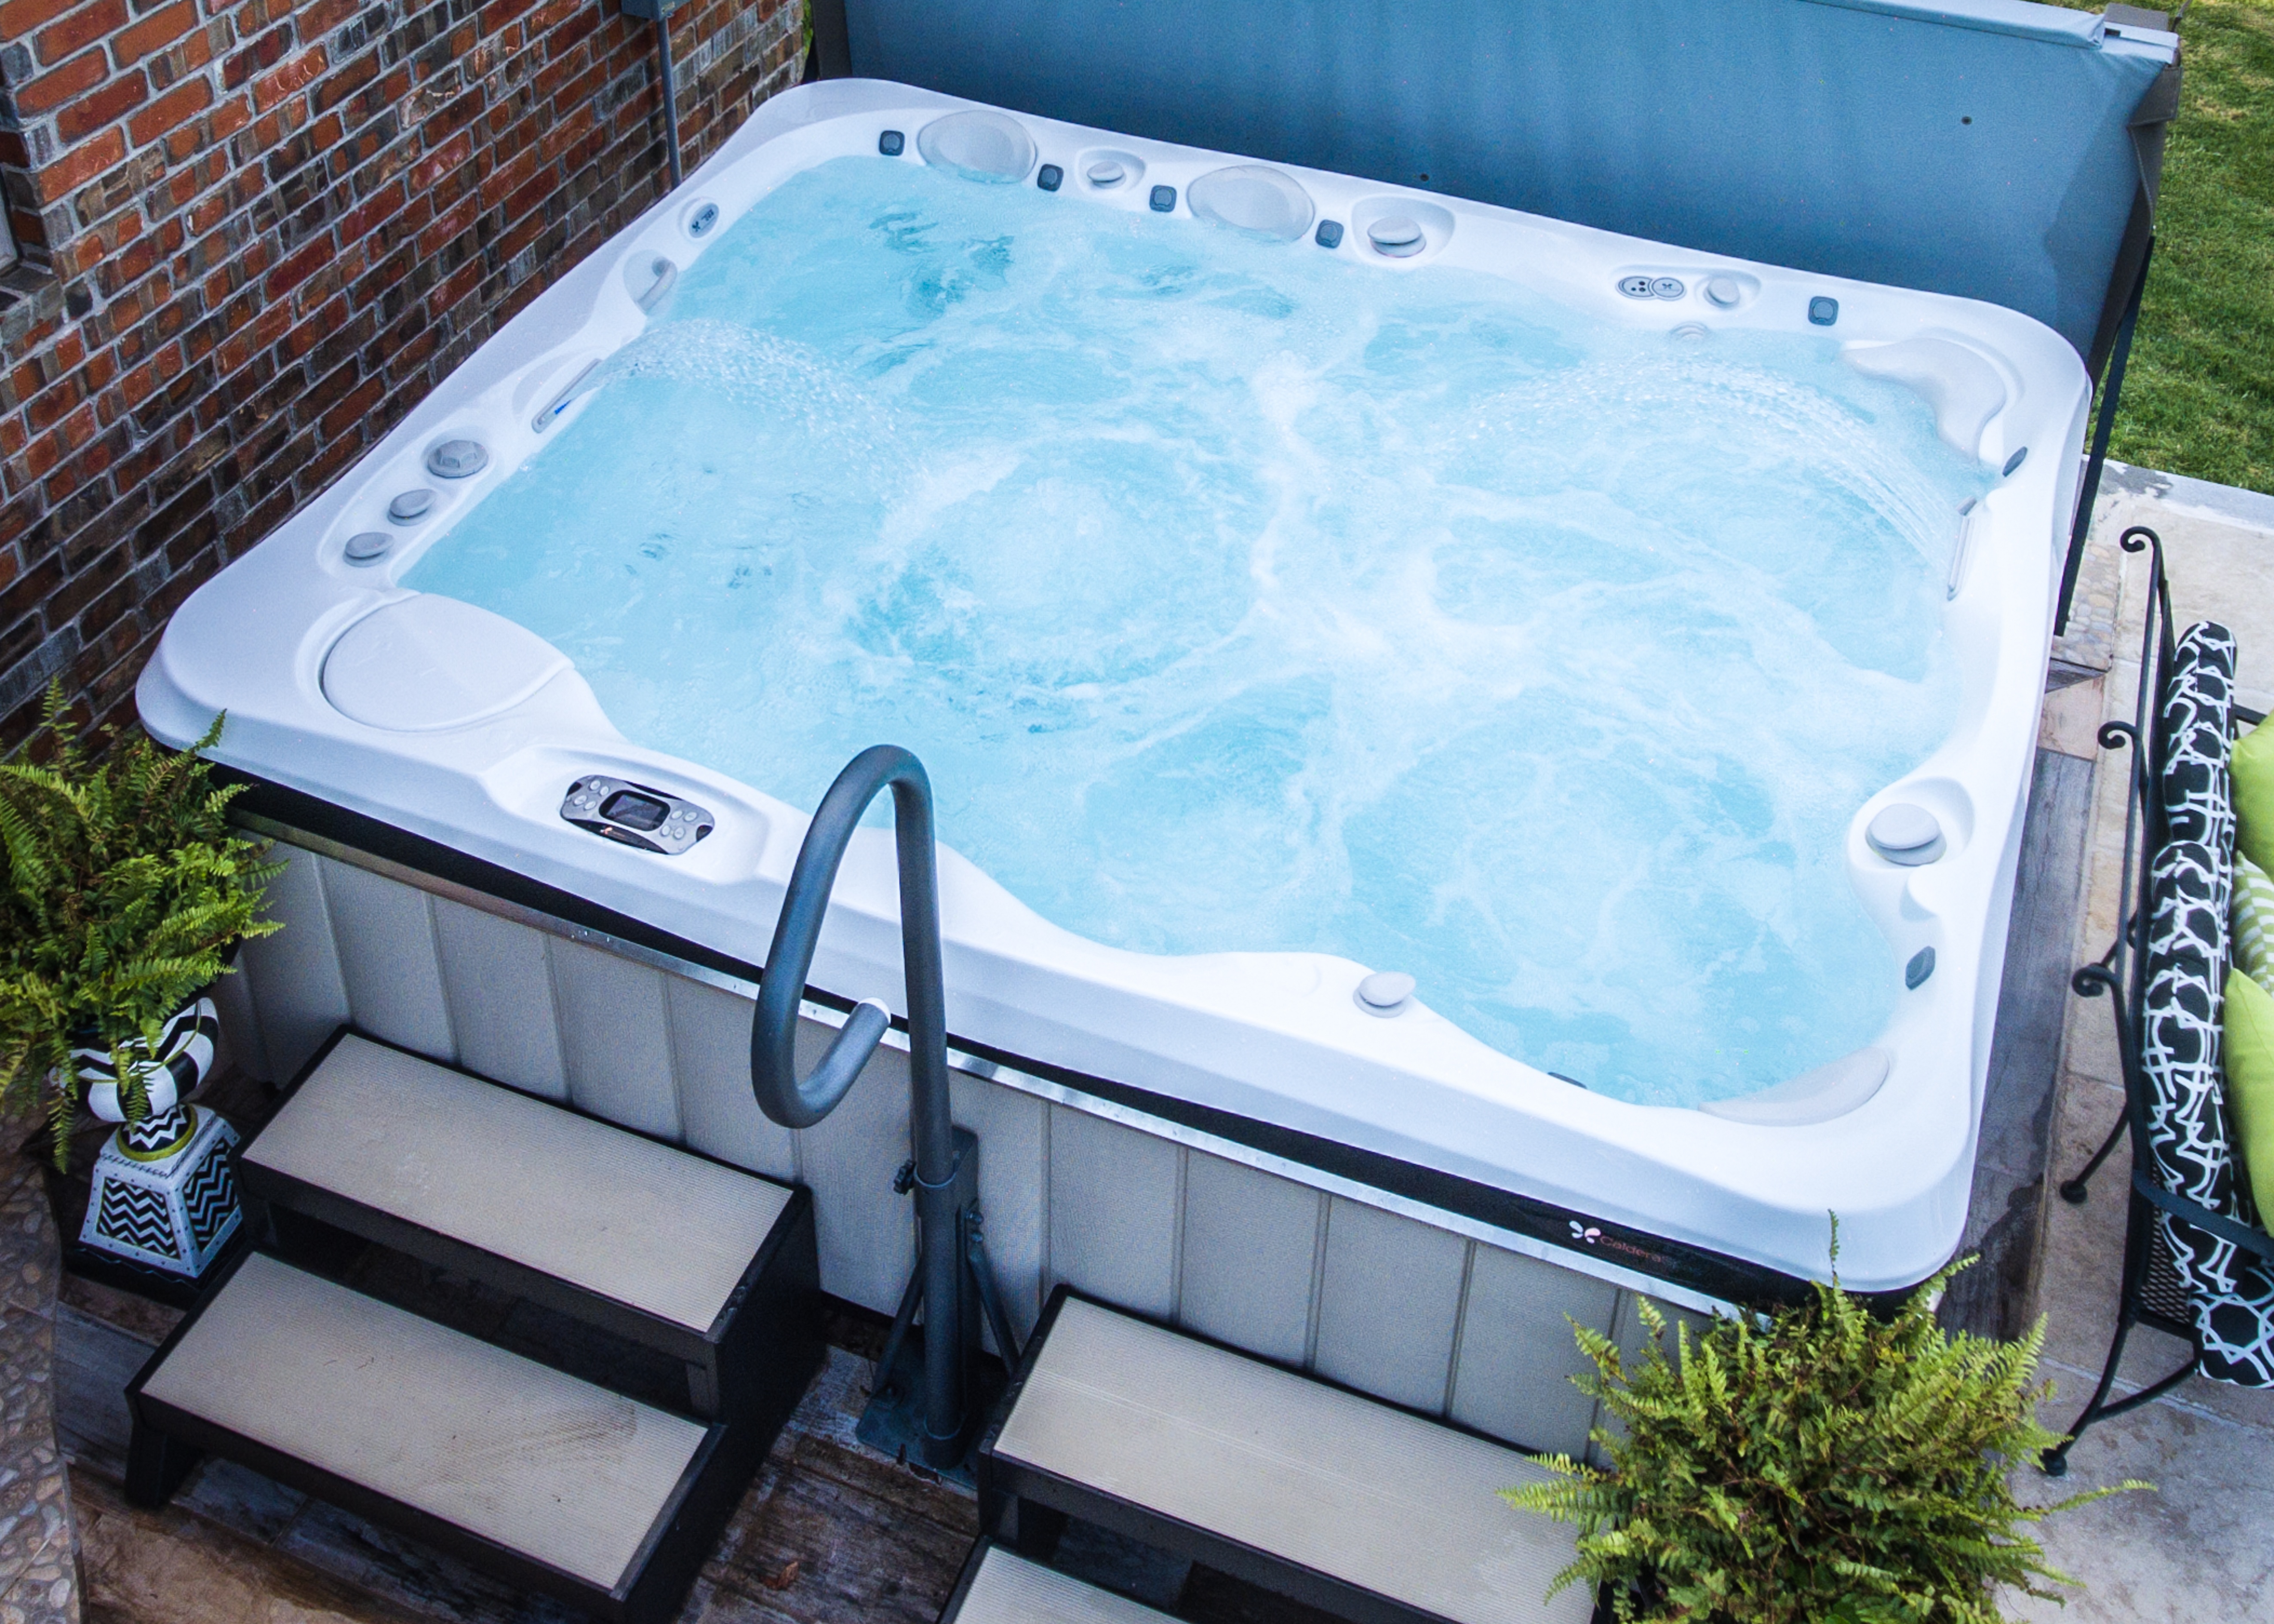 Why Wouldn’t You Own a Hot Tub? Survey says …. COST!